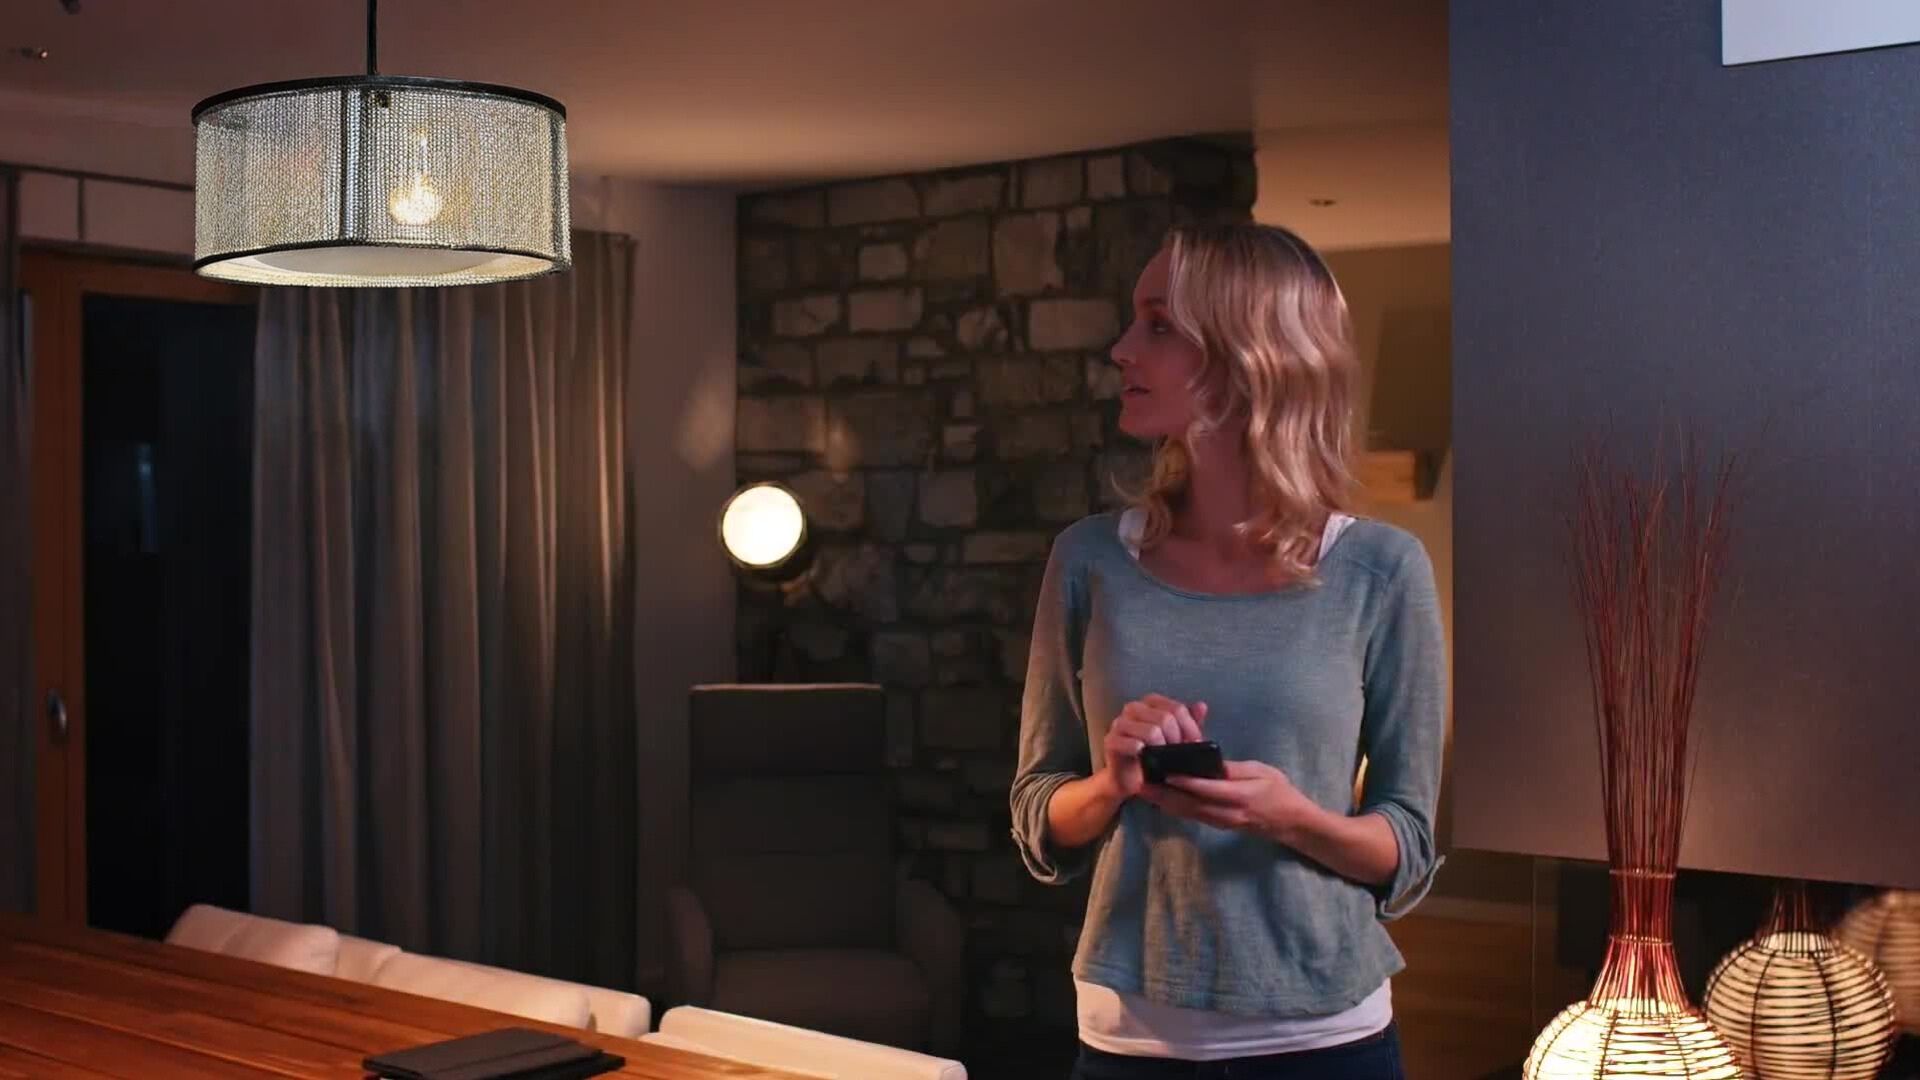 A woman uses a cell phone with the Total Connect App to use home automation features that turn on the lights in her home.